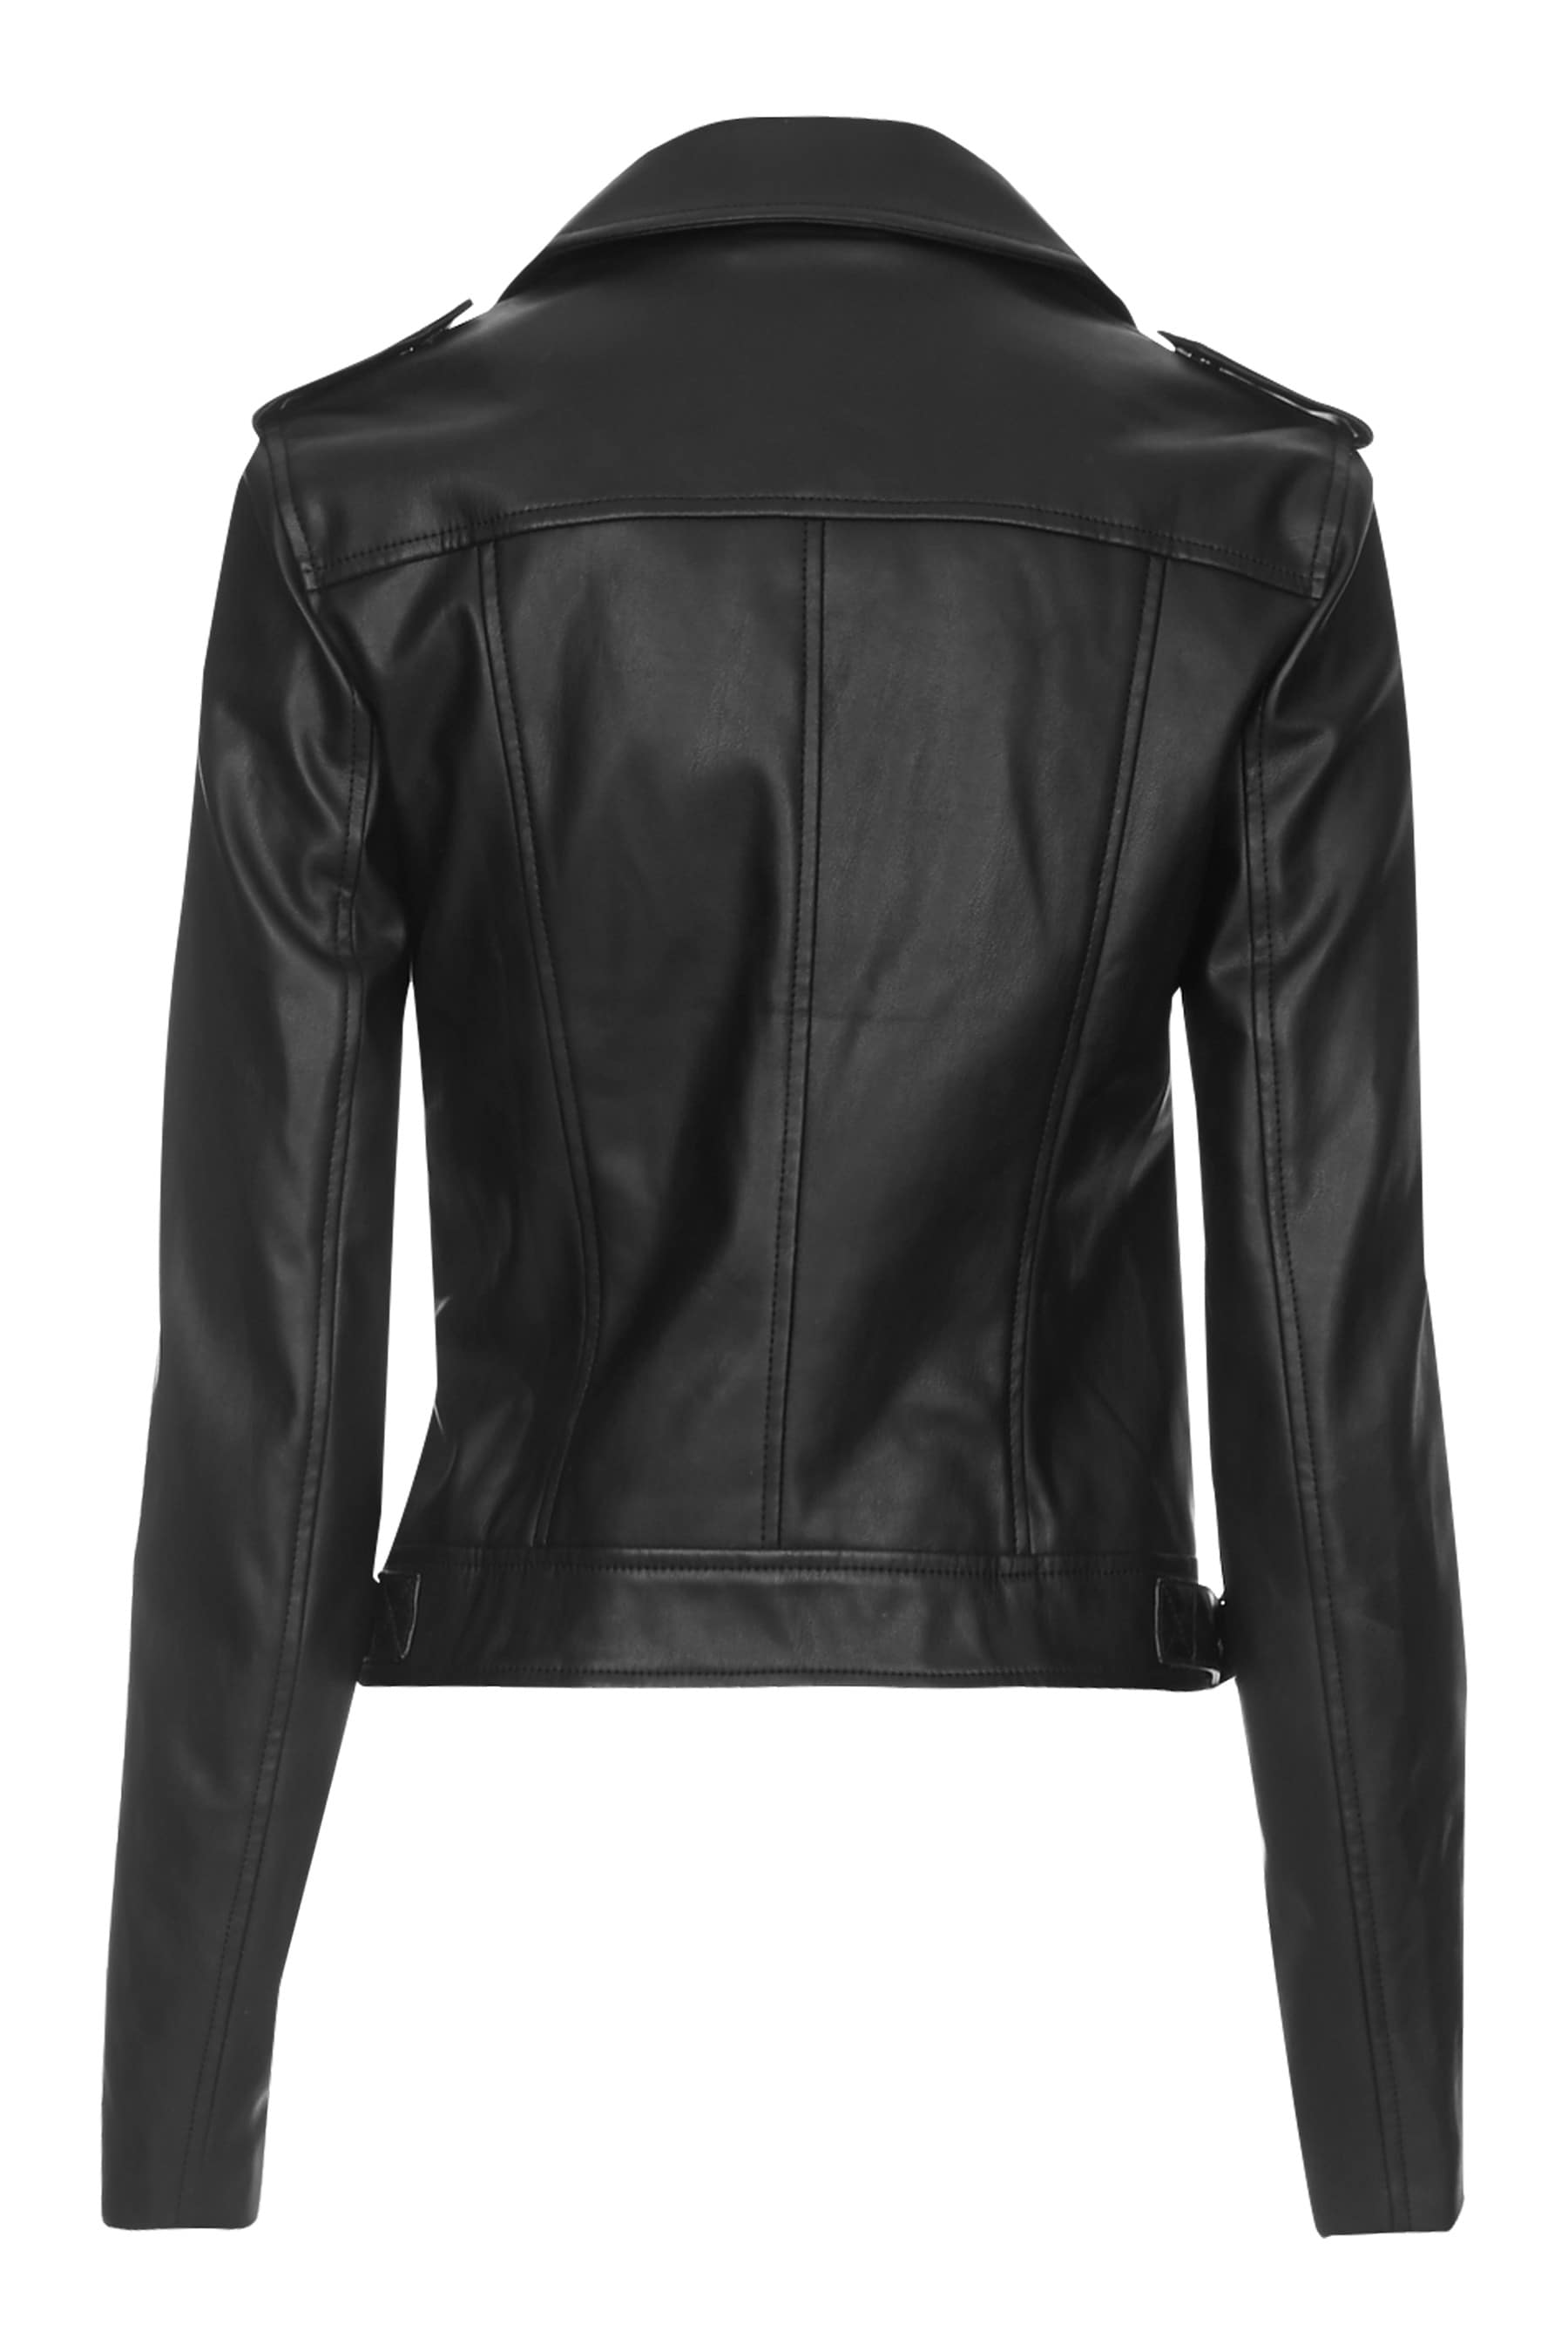 Buy Lipsy Faux Leather Biker Jacket from the Next UK online shop